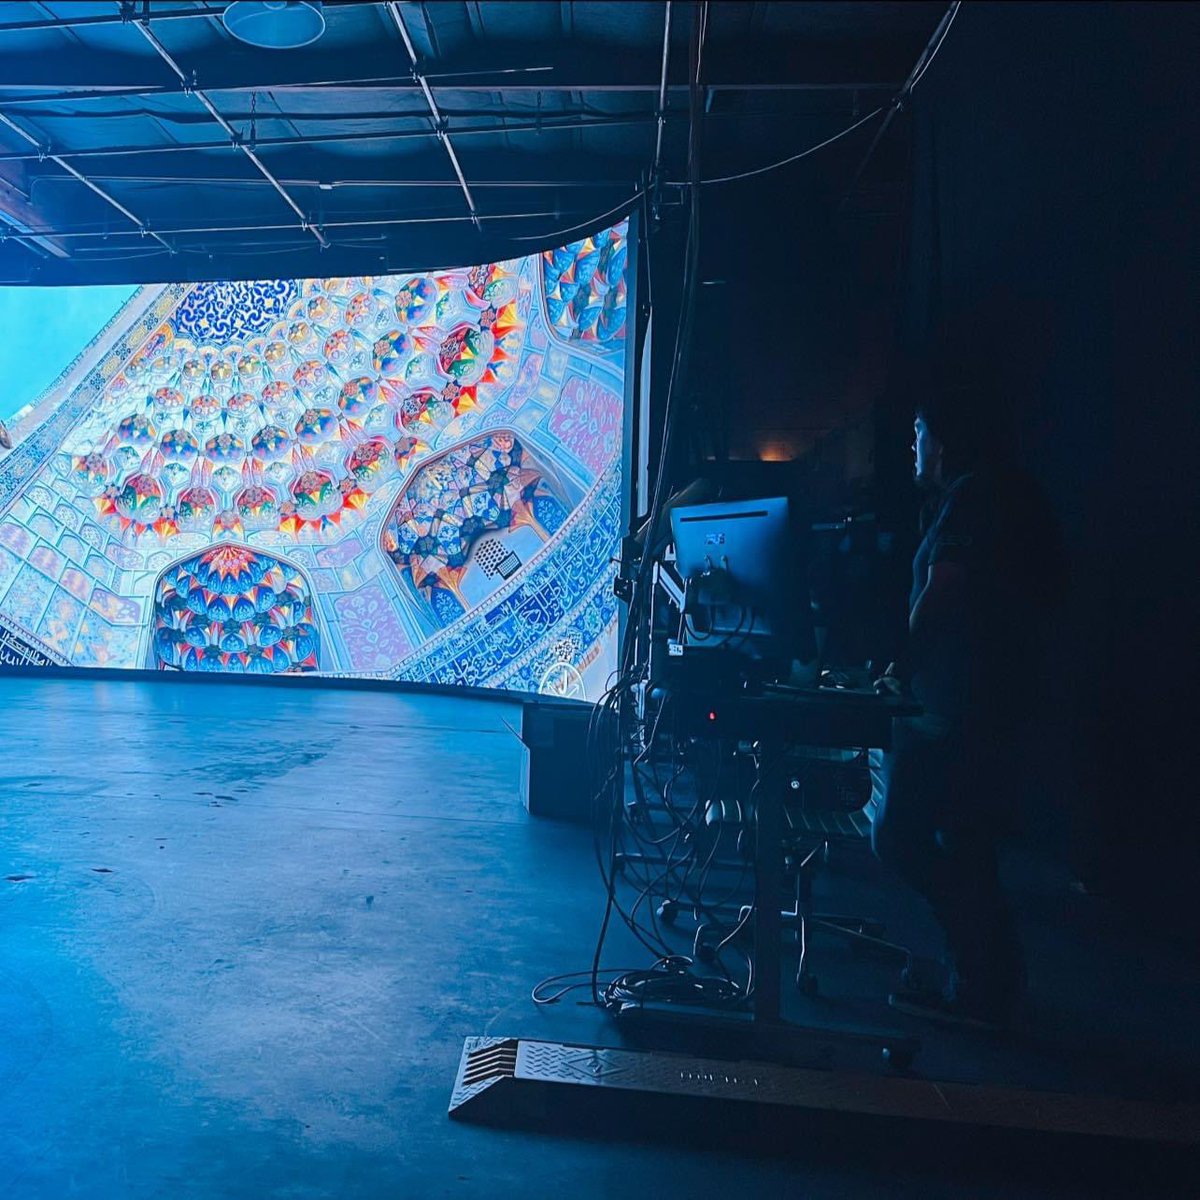 Blues on a Monday? Let’s fix that. Get your project on track with our help. Click the link in our bio - collaborators are standing by. #LEDWall #LEDVolume #ICVFX #Studio #LAFilmmaker #mondaymotivation